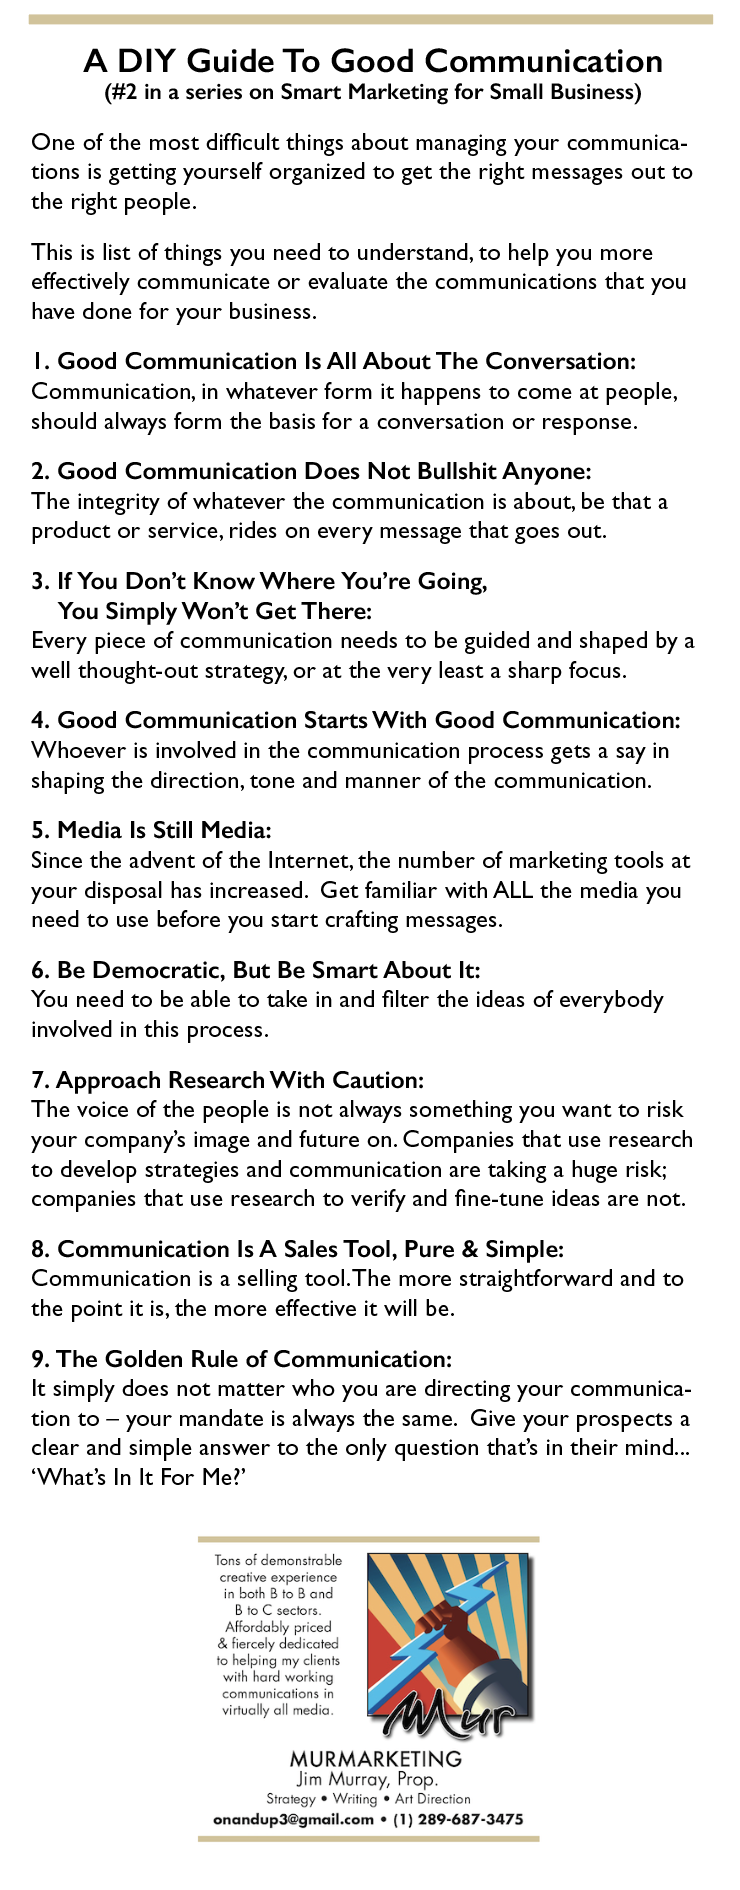 A DIY Guide To Good Communication

(#2 in a series on Smart Marketing for Small Business)

One of the most difficult things about managing your communica-
tions is getting yourself organized to get the right messages out to
the right people.

This is list of things you need to understand, to help you more
effectively communicate or evaluate the communications that you
have done for your business.

|. Good Communication Is All About The Conversation:
Communication, in whatever form it happens to come at people,
should always form the basis for a conversation or response.

2. Good Communication Does Not Bullshit Anyone:
The integrity of whatever the communication is about, be that a
product or service, rides on every message that goes out.

3. If You Don’t Know Where You're Going,

You Simply Won't Get There:
Every piece of communication needs to be guided and shaped by a
well thought-out strategy, or at the very least a sharp focus.

4. Good Communication Starts With Good Communication:
Whoever is involved in the communication process gets a say in
shaping the direction, tone and manner of the communication.

5. Media Is Still Media:

Since the advent of the Internet, the number of marketing tools at
your disposal has increased. Get familiar with ALL the media you
need to use before you start crafting messages.

6. Be Democratic, But Be Smart About It:
You need to be able to take in and filter the ideas of everybody
involved in this process.

7. Approach Research With Caution:

The voice of the people is not always something you want to risk
your company's image and future on. Companies that use research
to develop strategies and communication are taking a huge risk;
companies that use research to verify and fine-tune ideas are not.

8. Communication Is A Sales Tool, Pure & Simple:
Communication is a selling tool. The more straightforward and to
the point it is, the more effective it will be.

9. The Golden Rule of Communication:

It simply does not matter who you are directing your communica-
tion to — your mandate is always the same. Give your prospects a
clear and simple answer to the only question that’s in their mind...
‘What's In It For Me?"

 

MURMARKETING

ay

 

 

onandupdégmail.com + (1) 289-687-3475